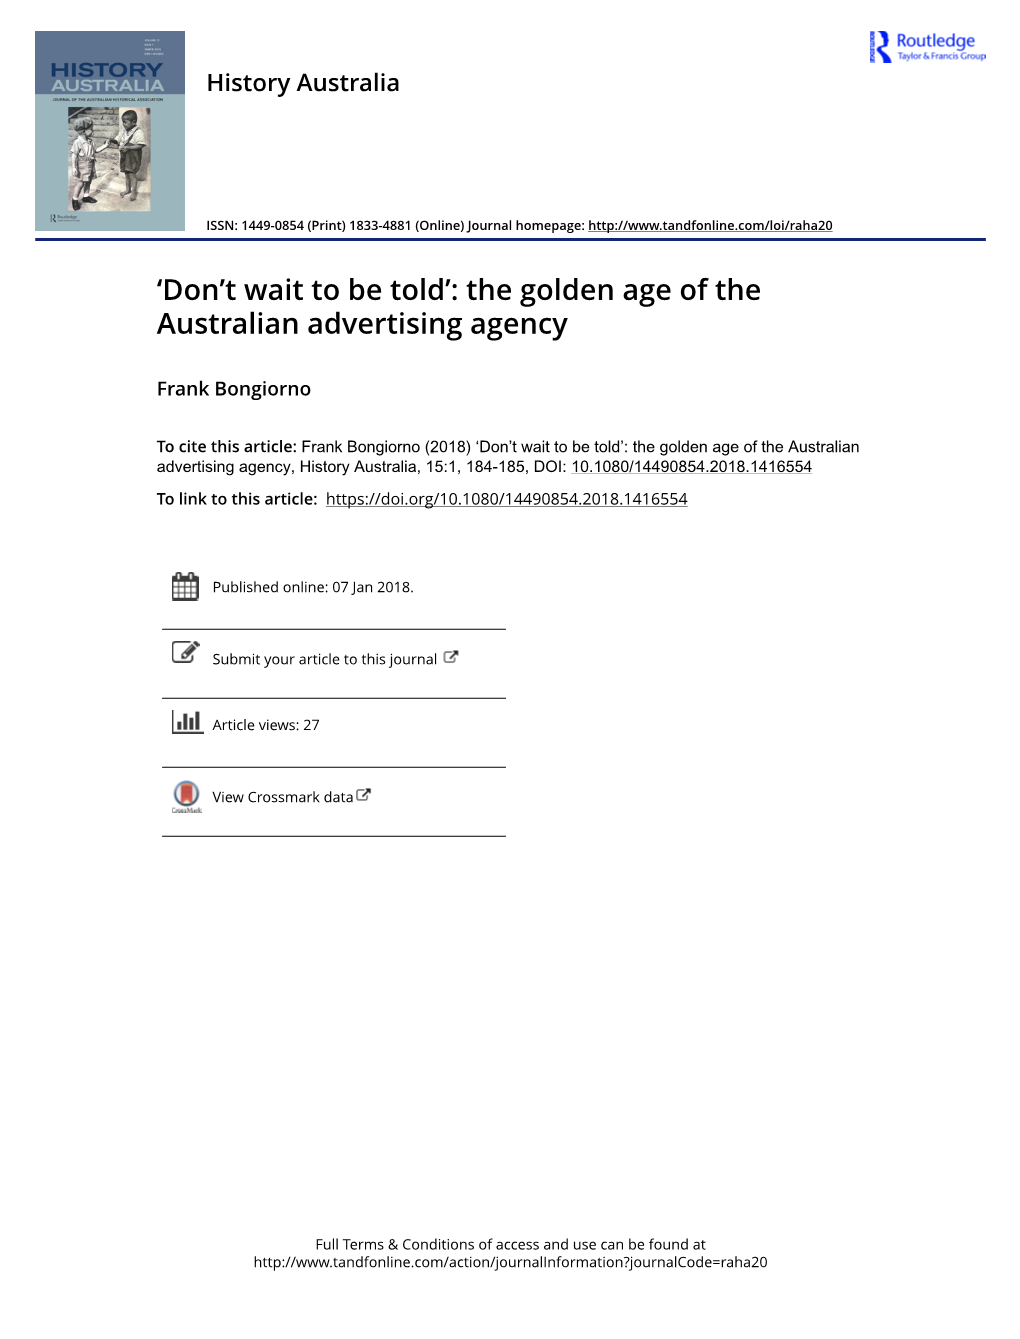 The Golden Age of the Australian Advertising Agency